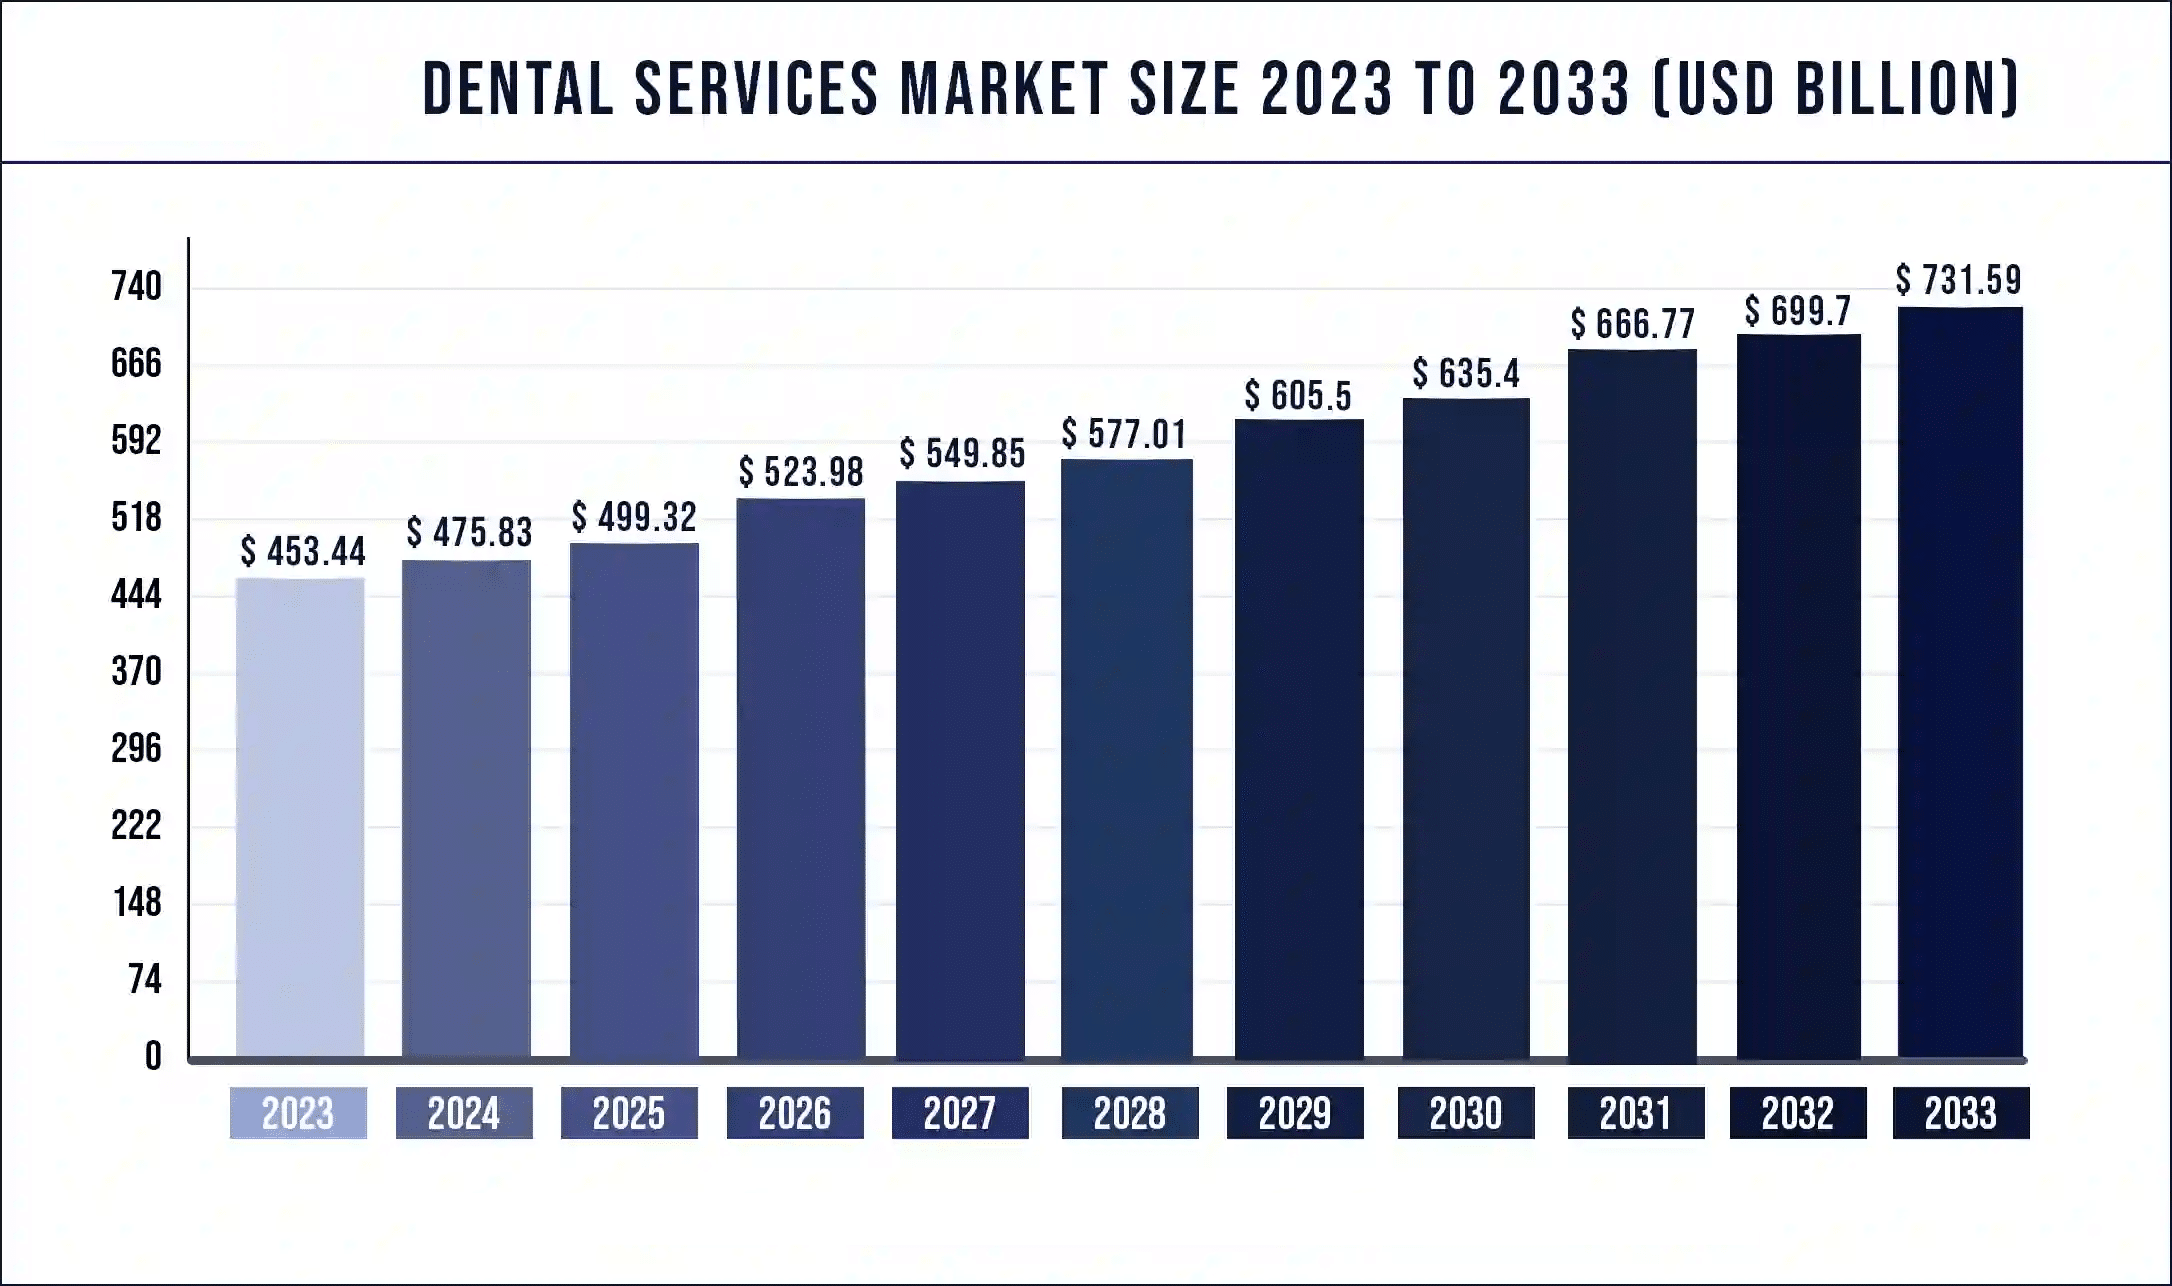 Dental Services Market Size 2023 to 2033